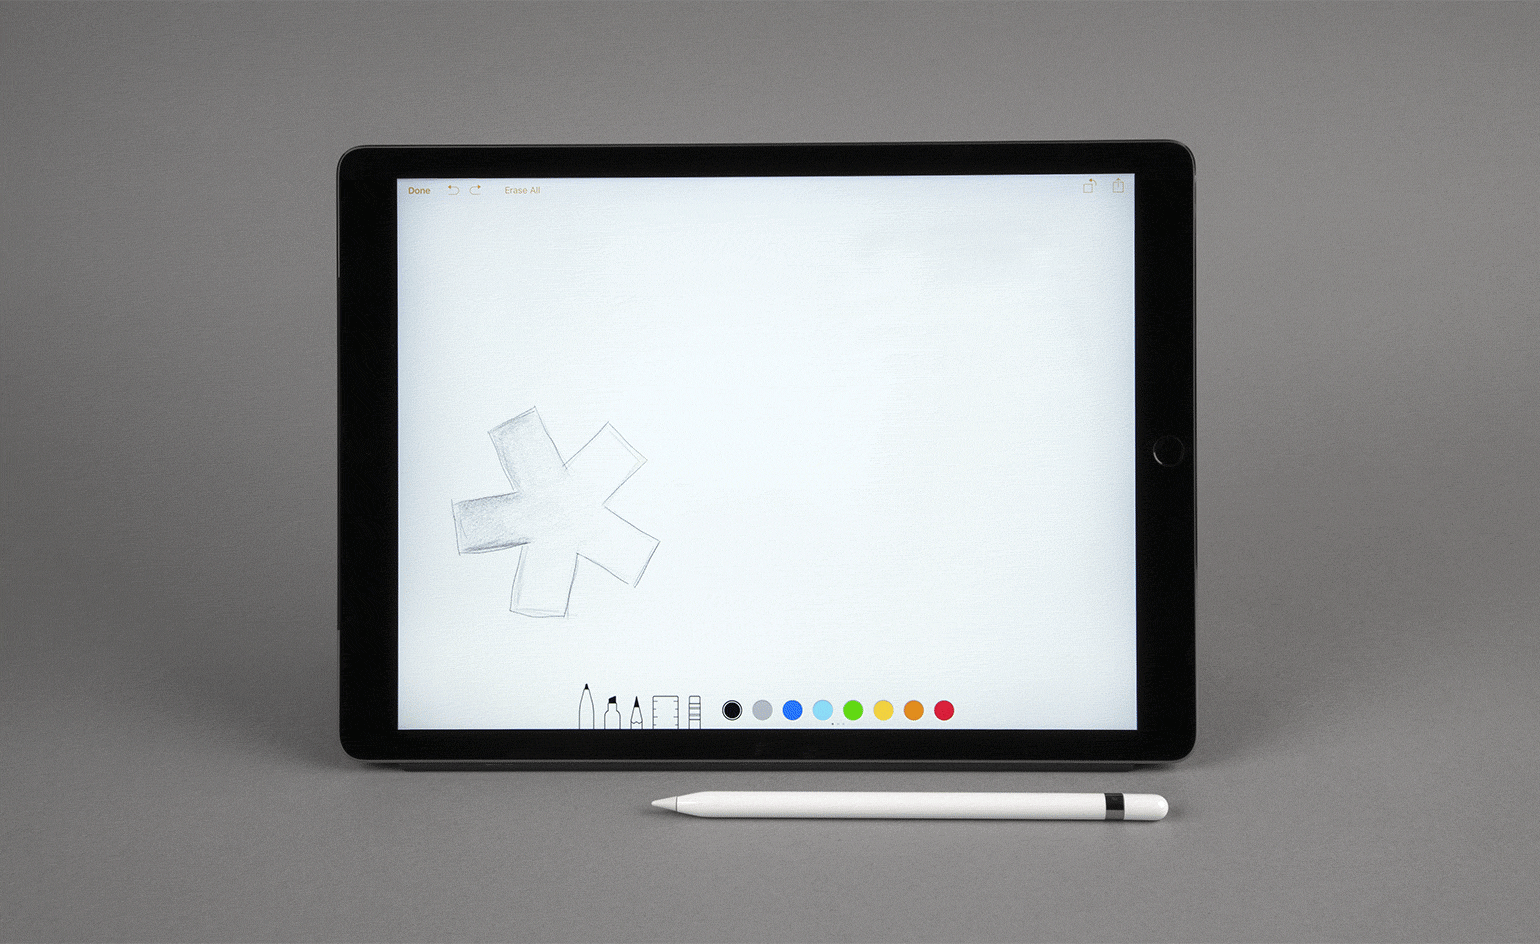 Gif of an Apple Pencil in front of an Apple iPad with the Wallpaper* asterisk appearing on the screen in different colours - both items are pictured against a grey background